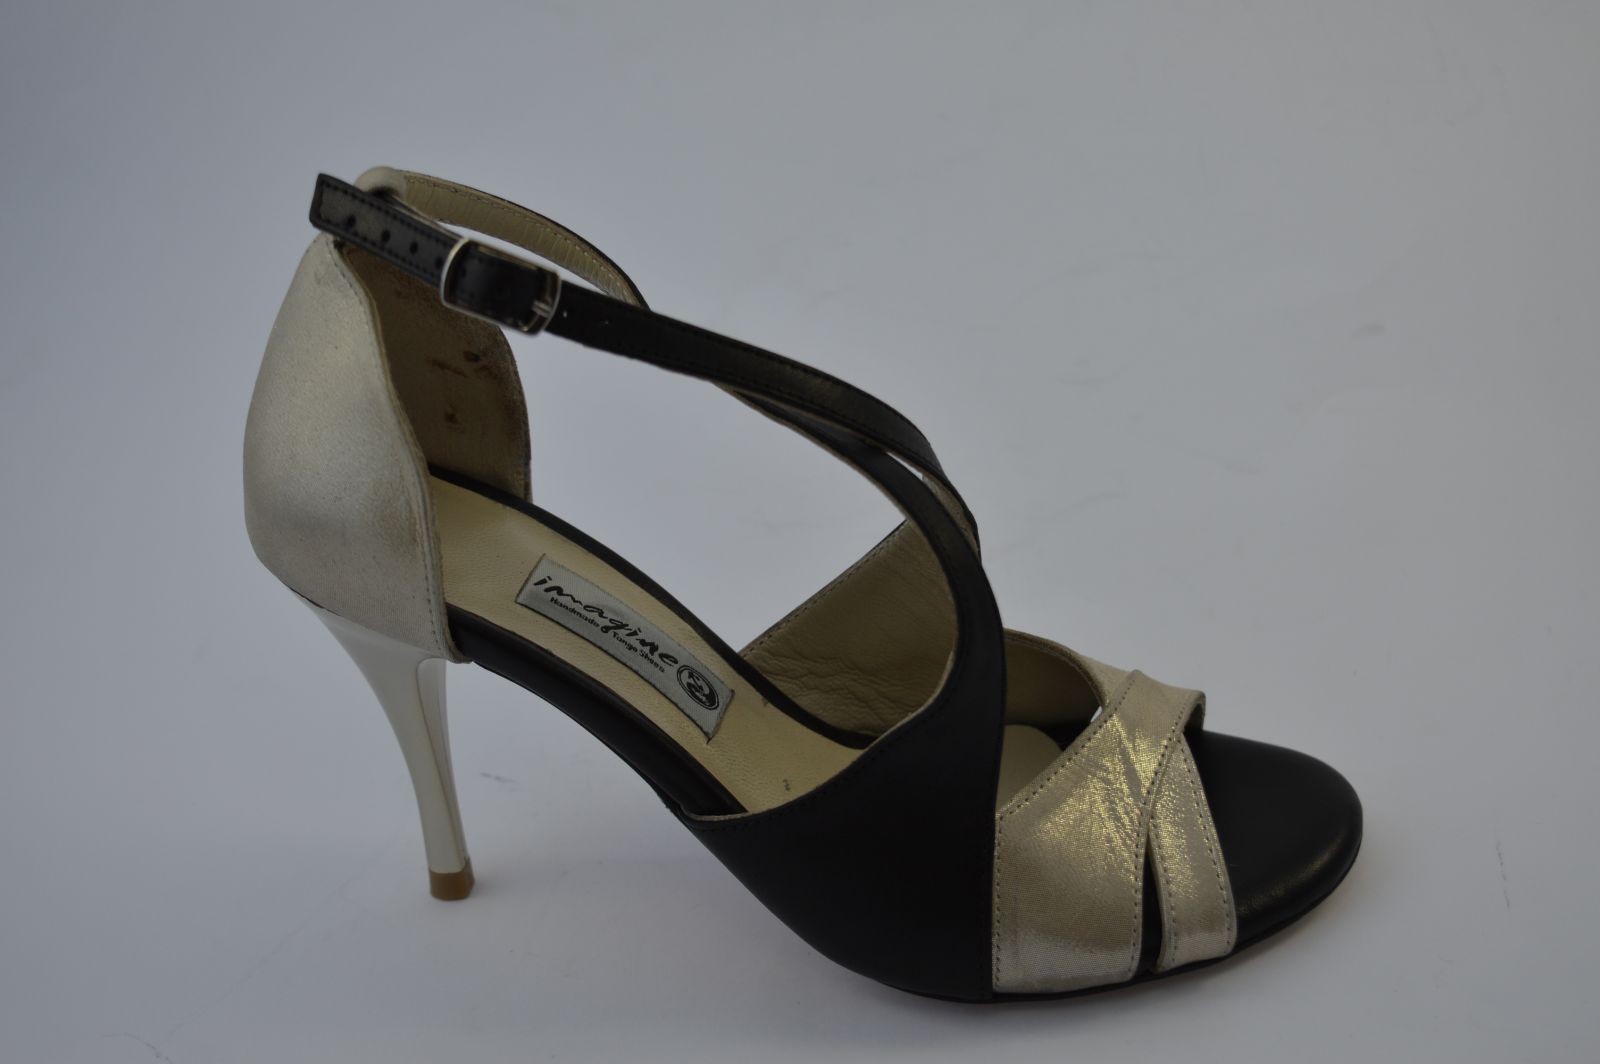 Women's Tango Shoe, open toe style, with gold pearlized leather and black leather